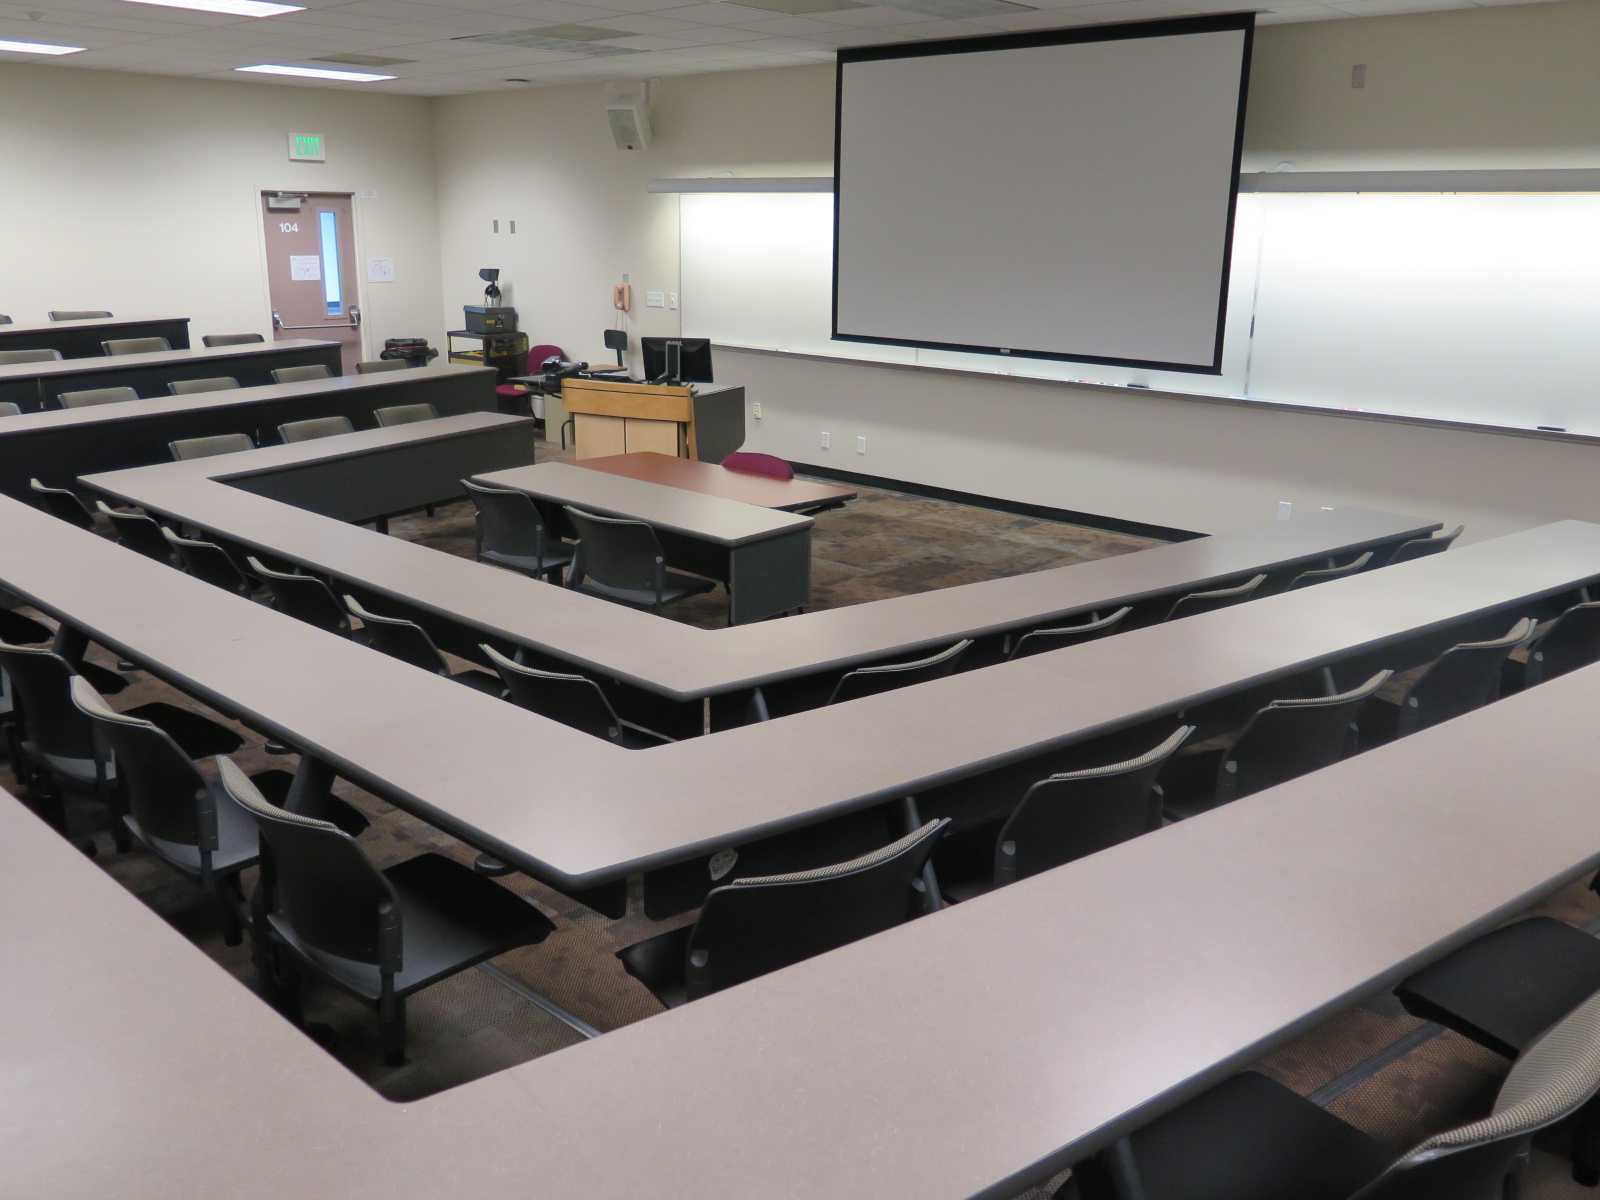 Room Consists of Carpet floors, Stationary rows of Tables and Chairs, and a white board and podium are both located at the front of the room.